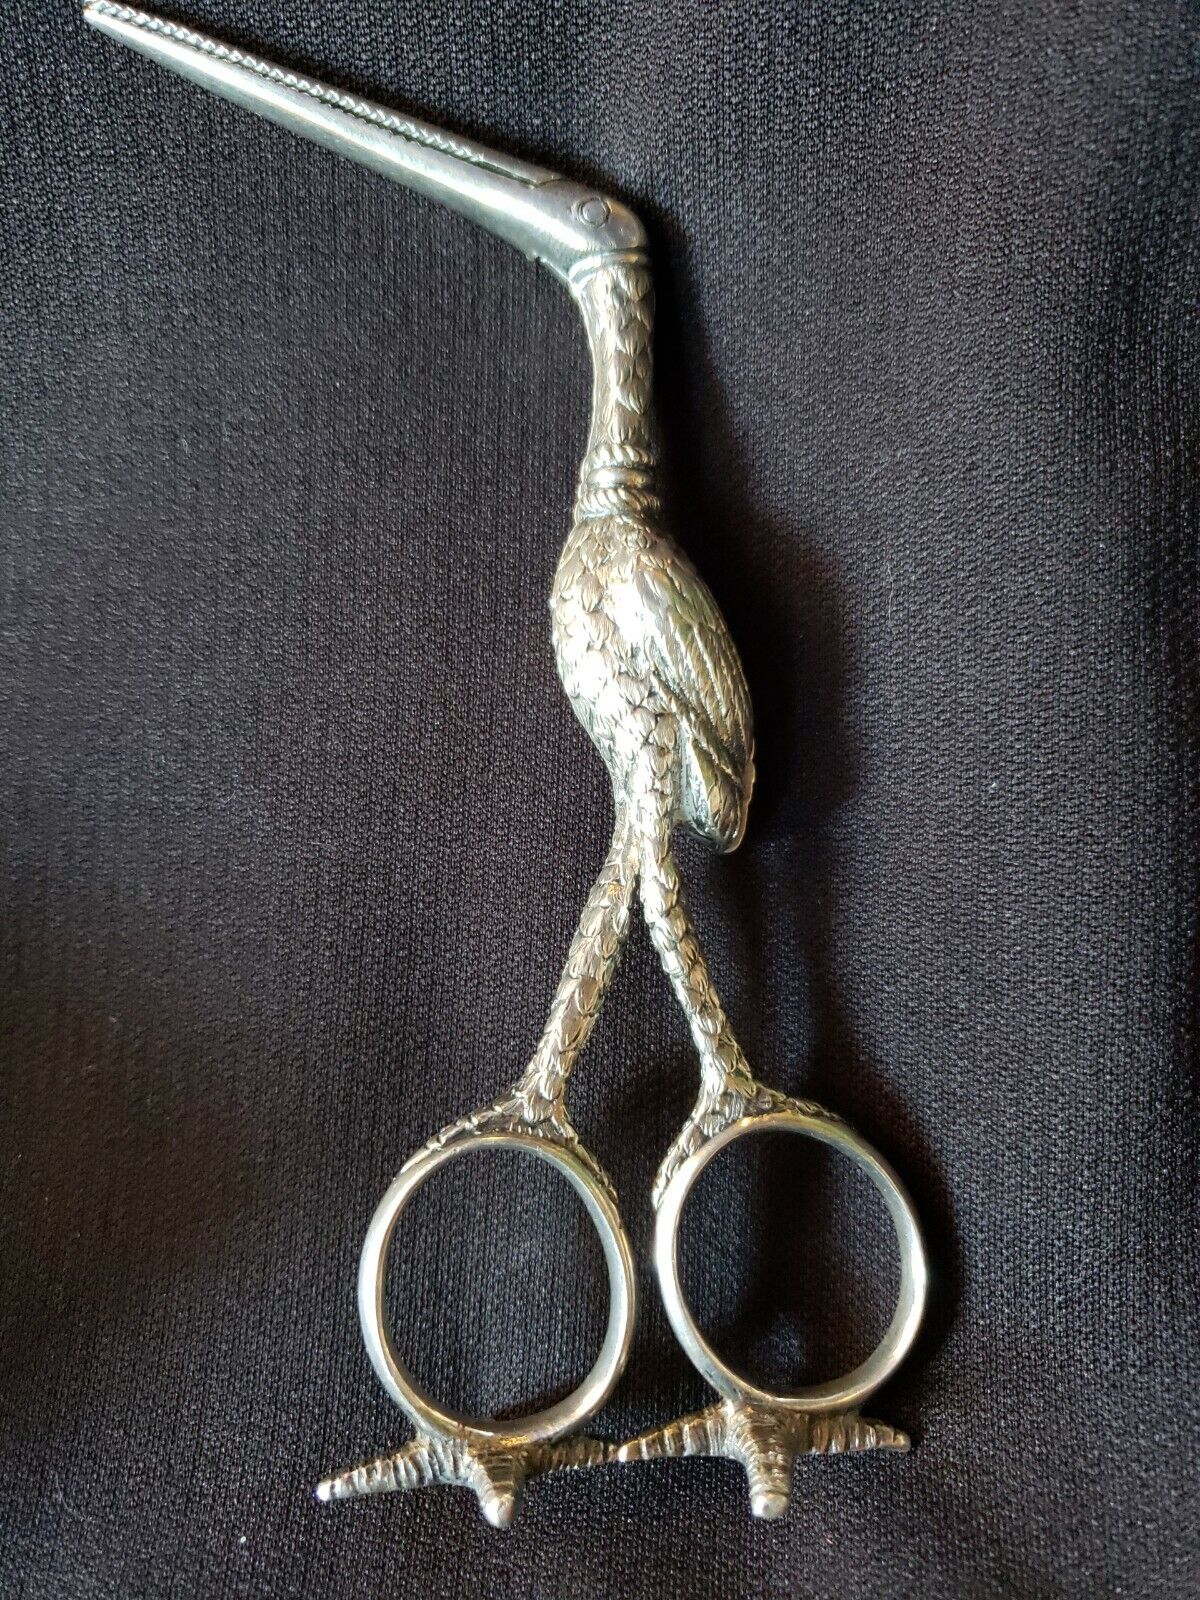 Antique Tiffany sterling Silver Umbilical Cord Clips 1800s